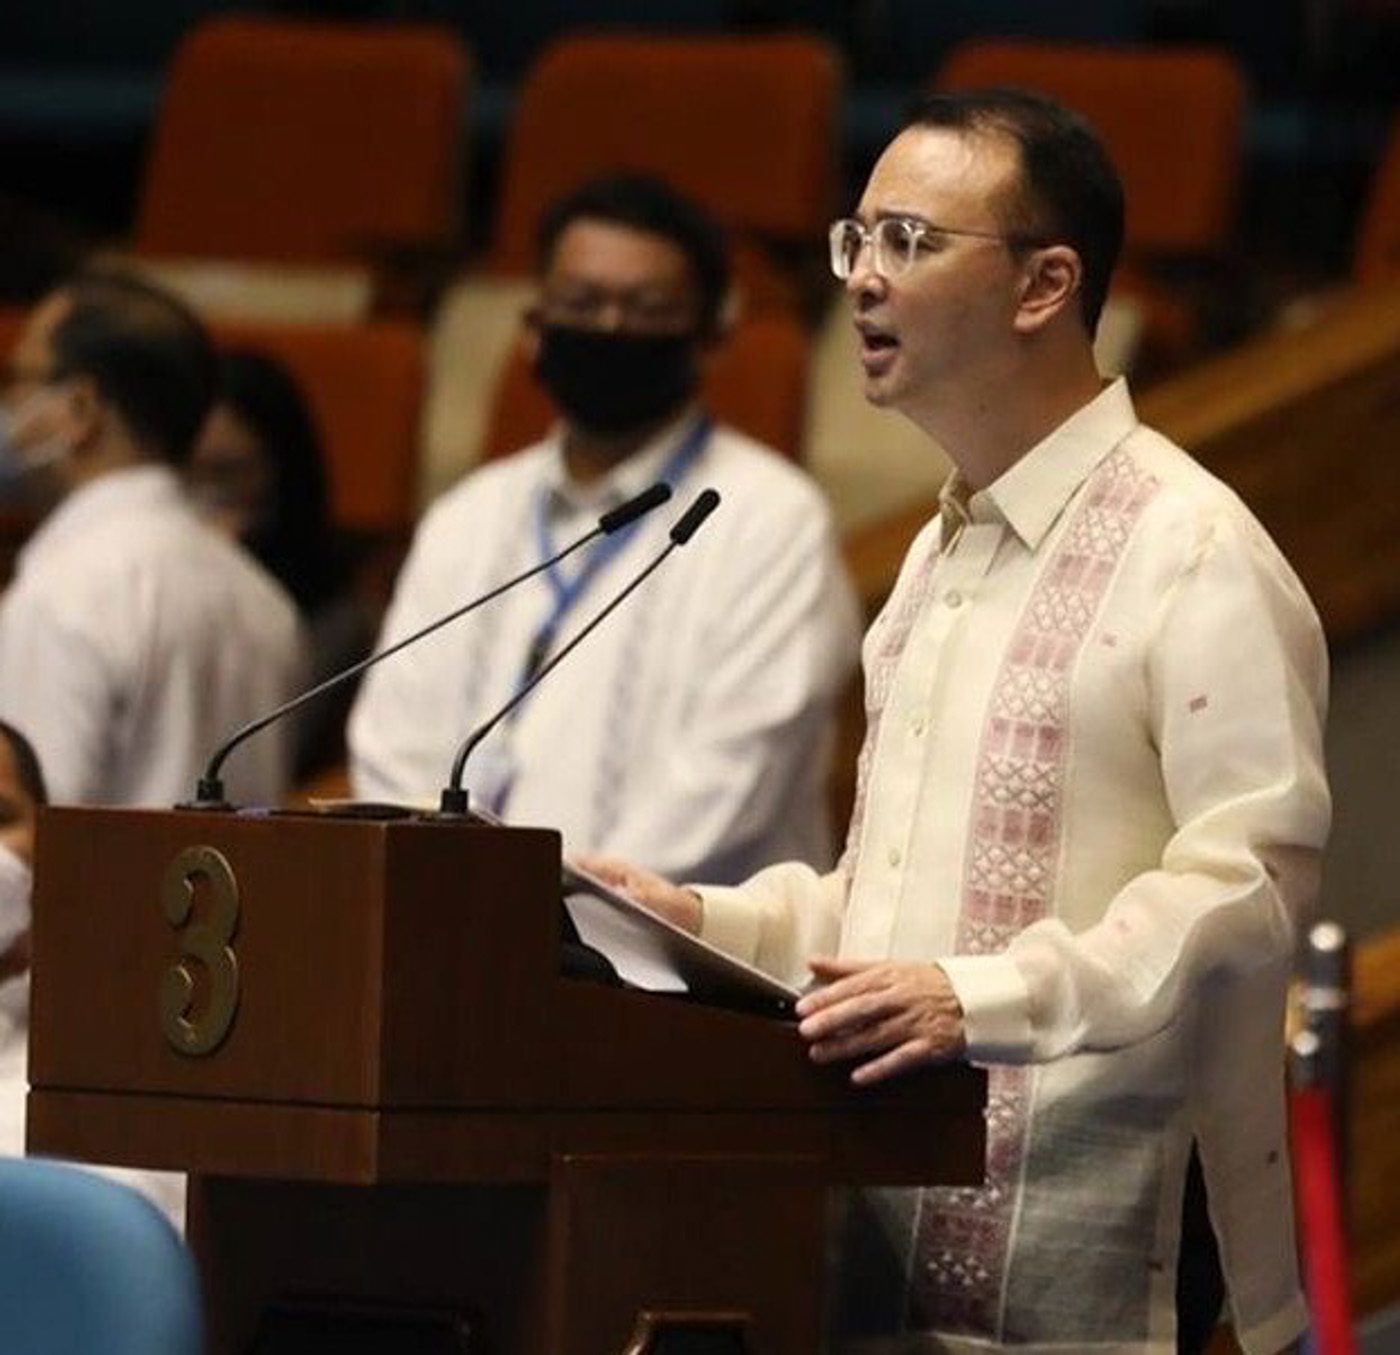 Cayetano: I don’t want my stint to end without finishing ABS-CBN hearings